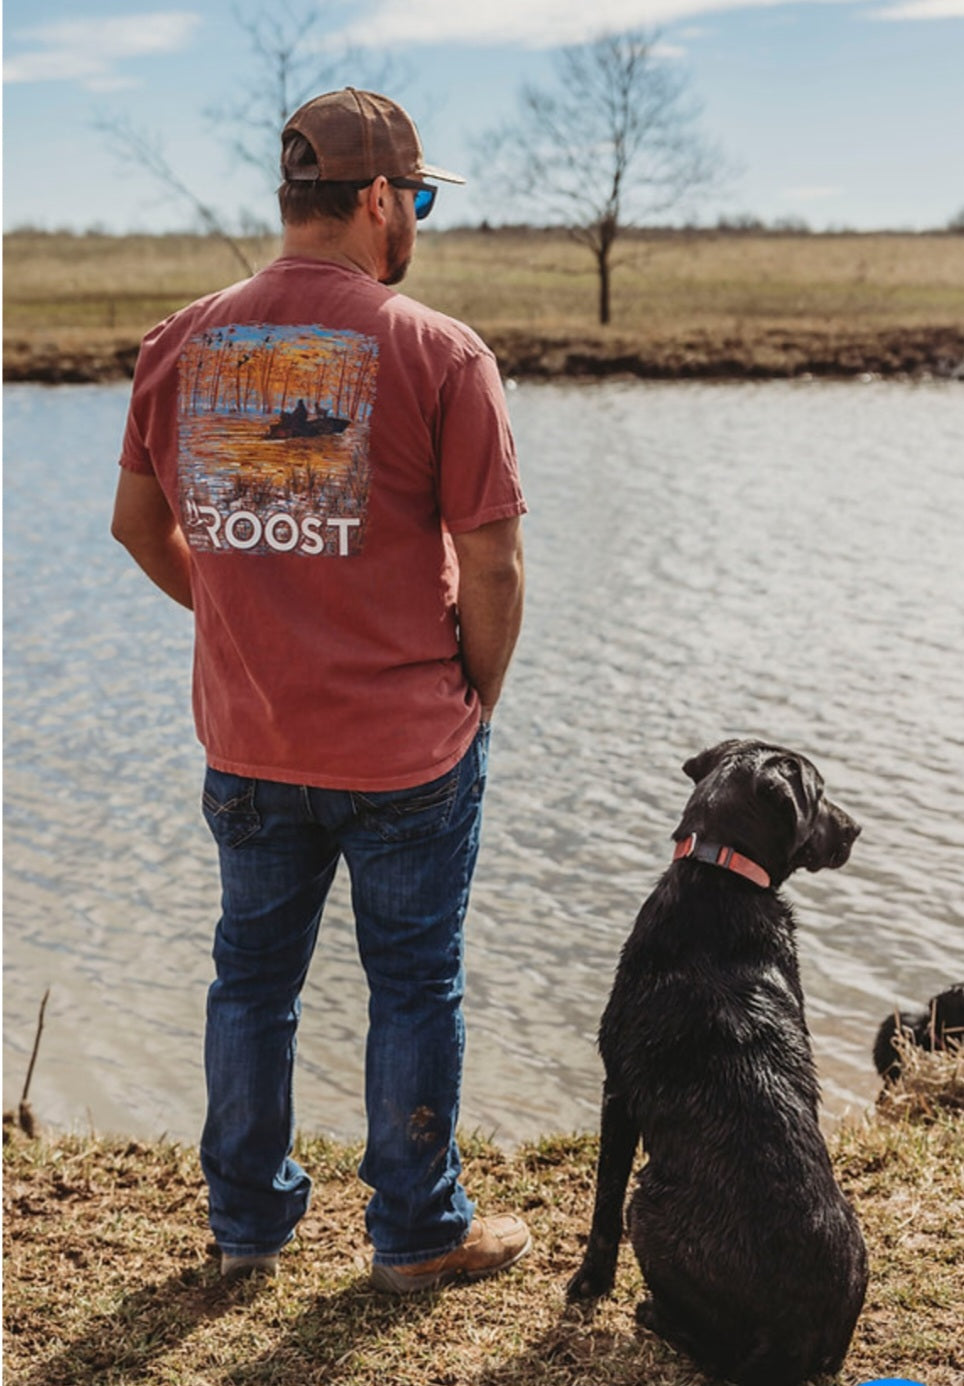 Roost Early Riser Tee